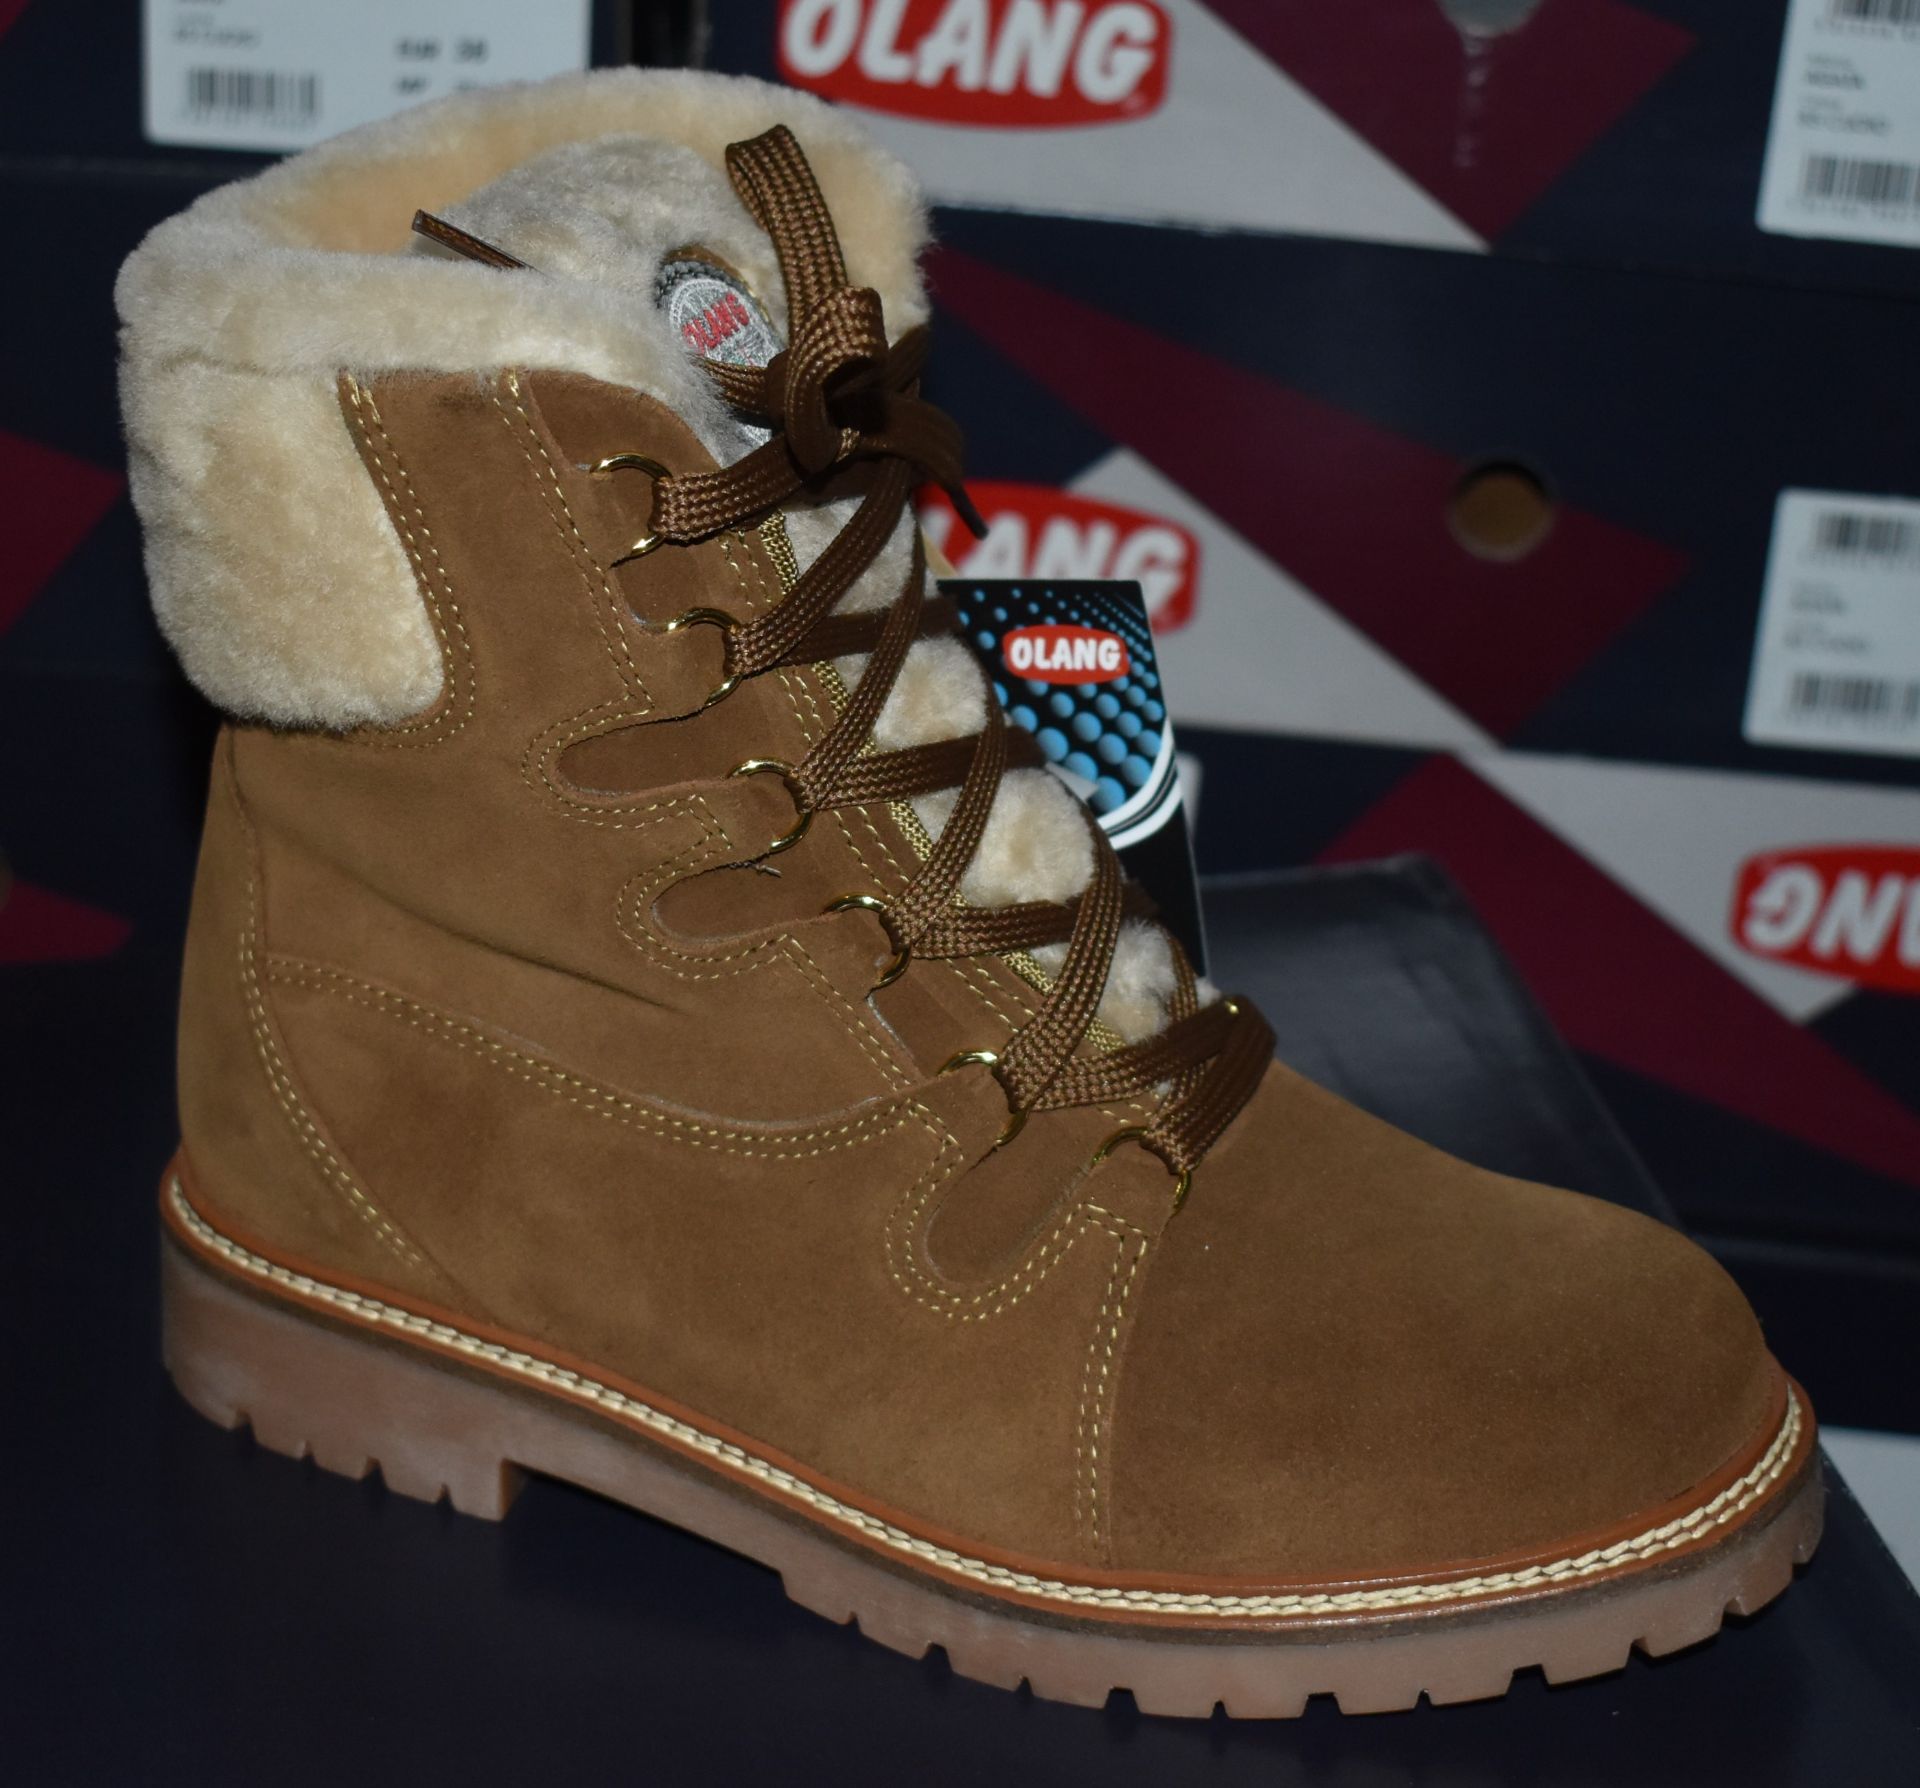 1 x Pair of Designer Olang Meribel 85 CUOIO Women's Winter Boots - Euro Size 39 - Brand New Boxed - Image 4 of 8